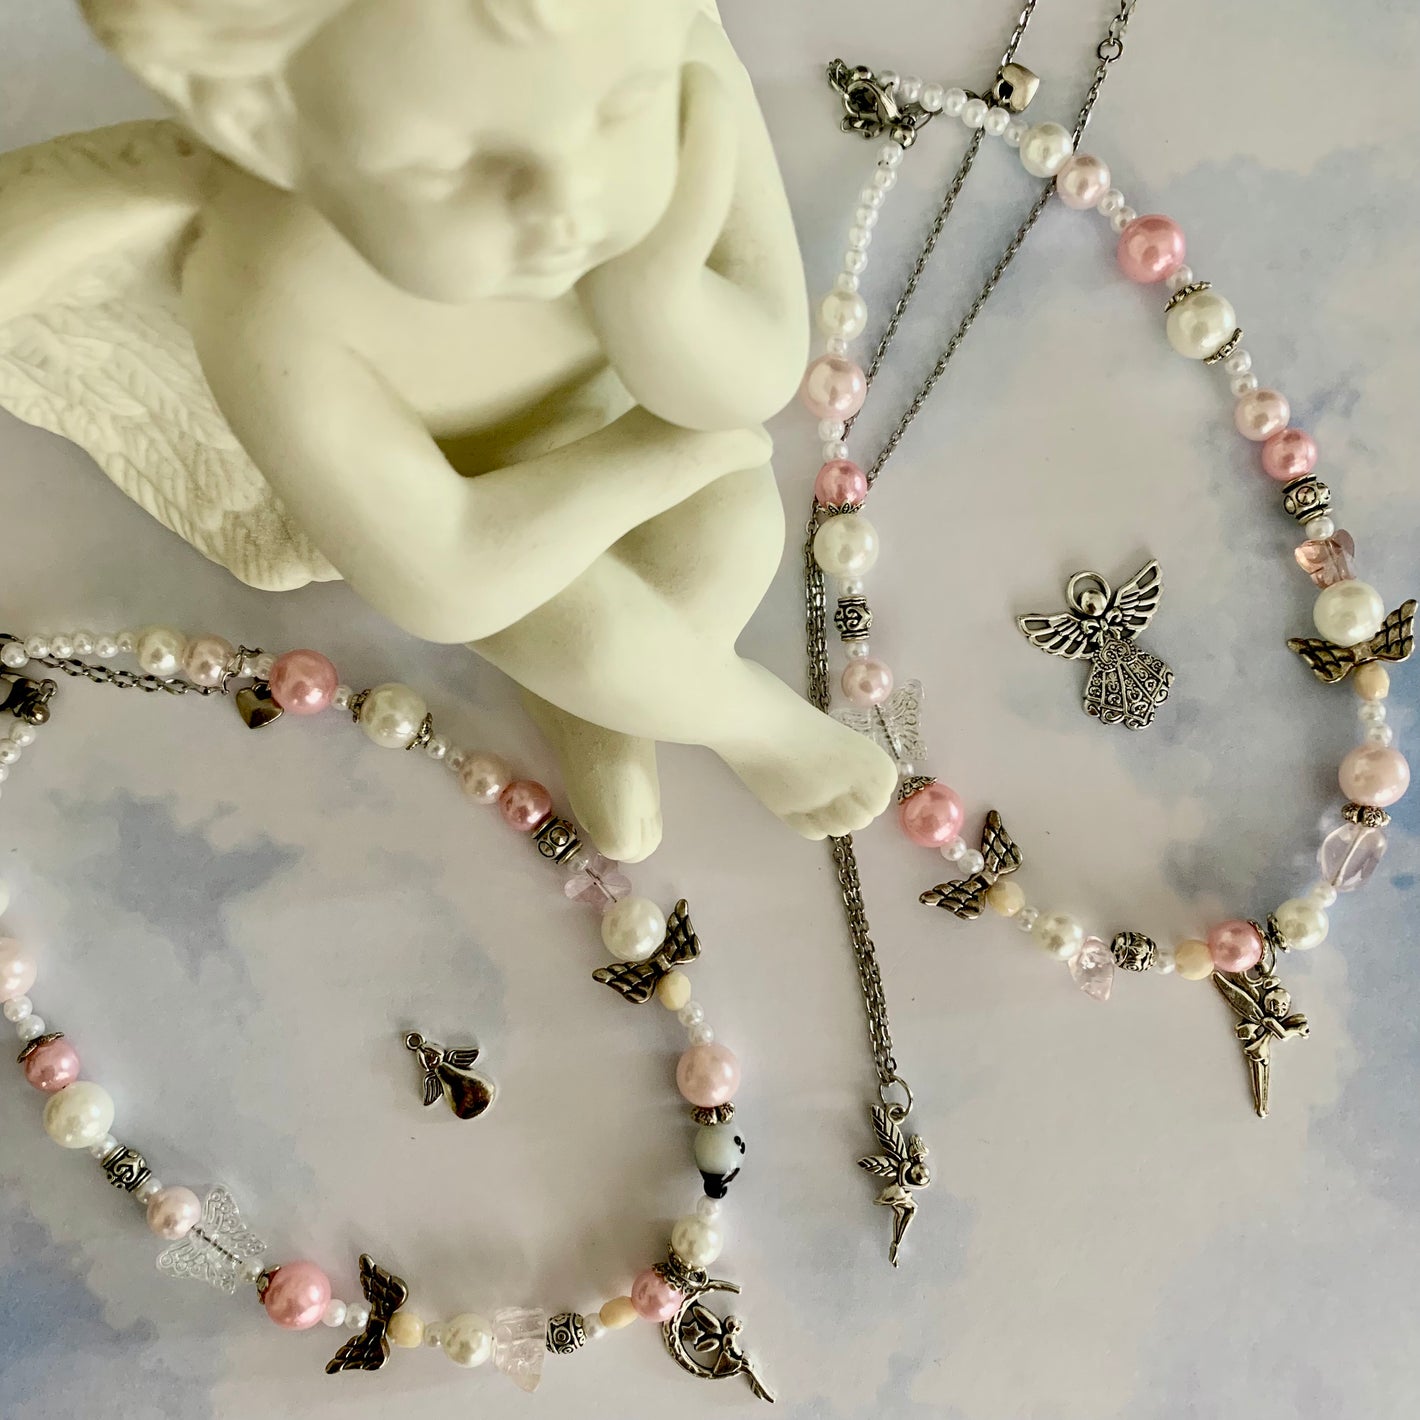 Pretty in Pink necklaces with fairy and angel charms by SisBling.